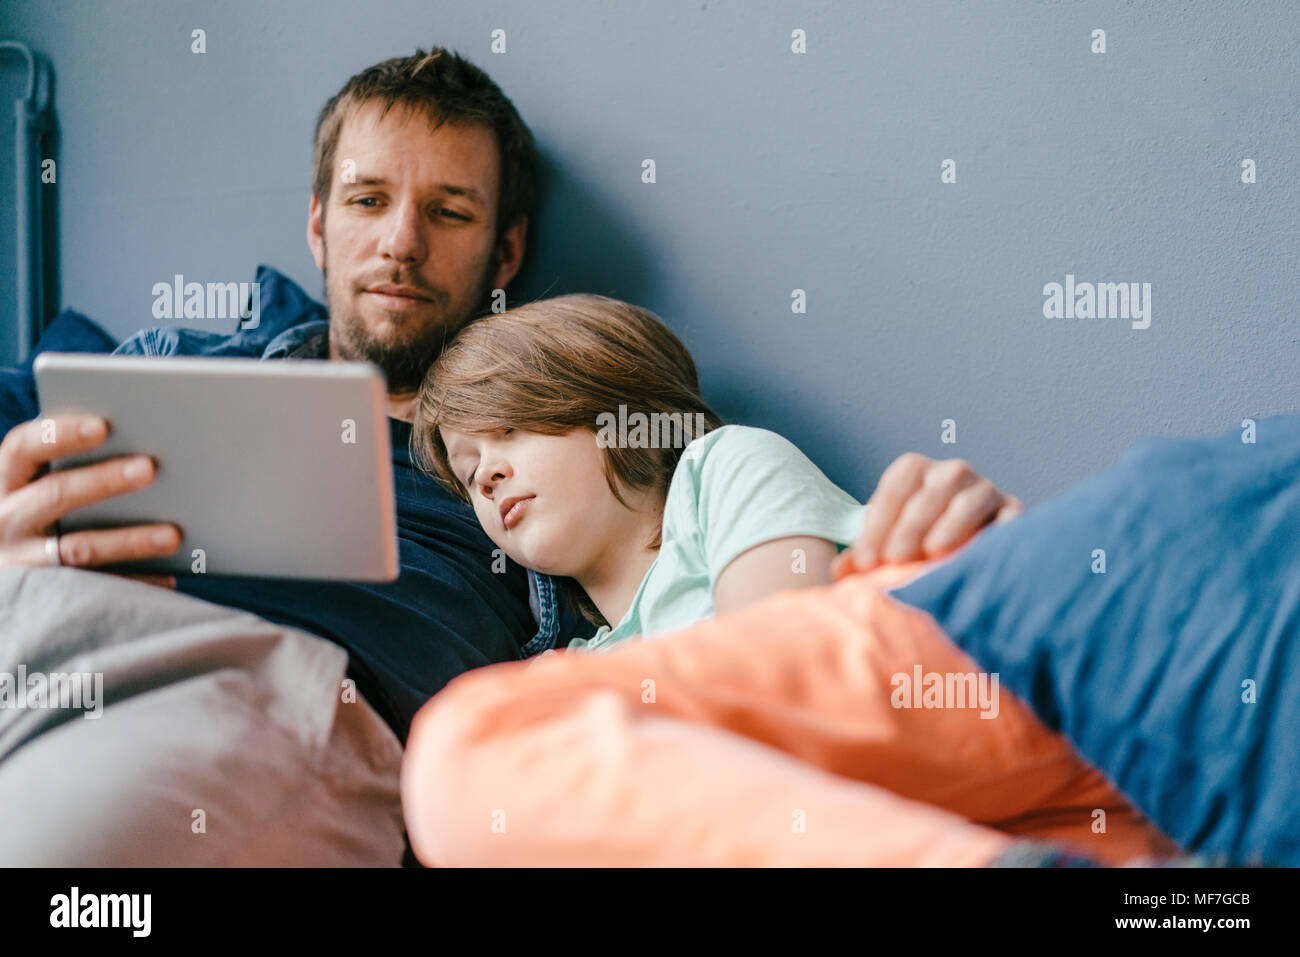 Father and son watching a movie on tablet at home Stock Photo